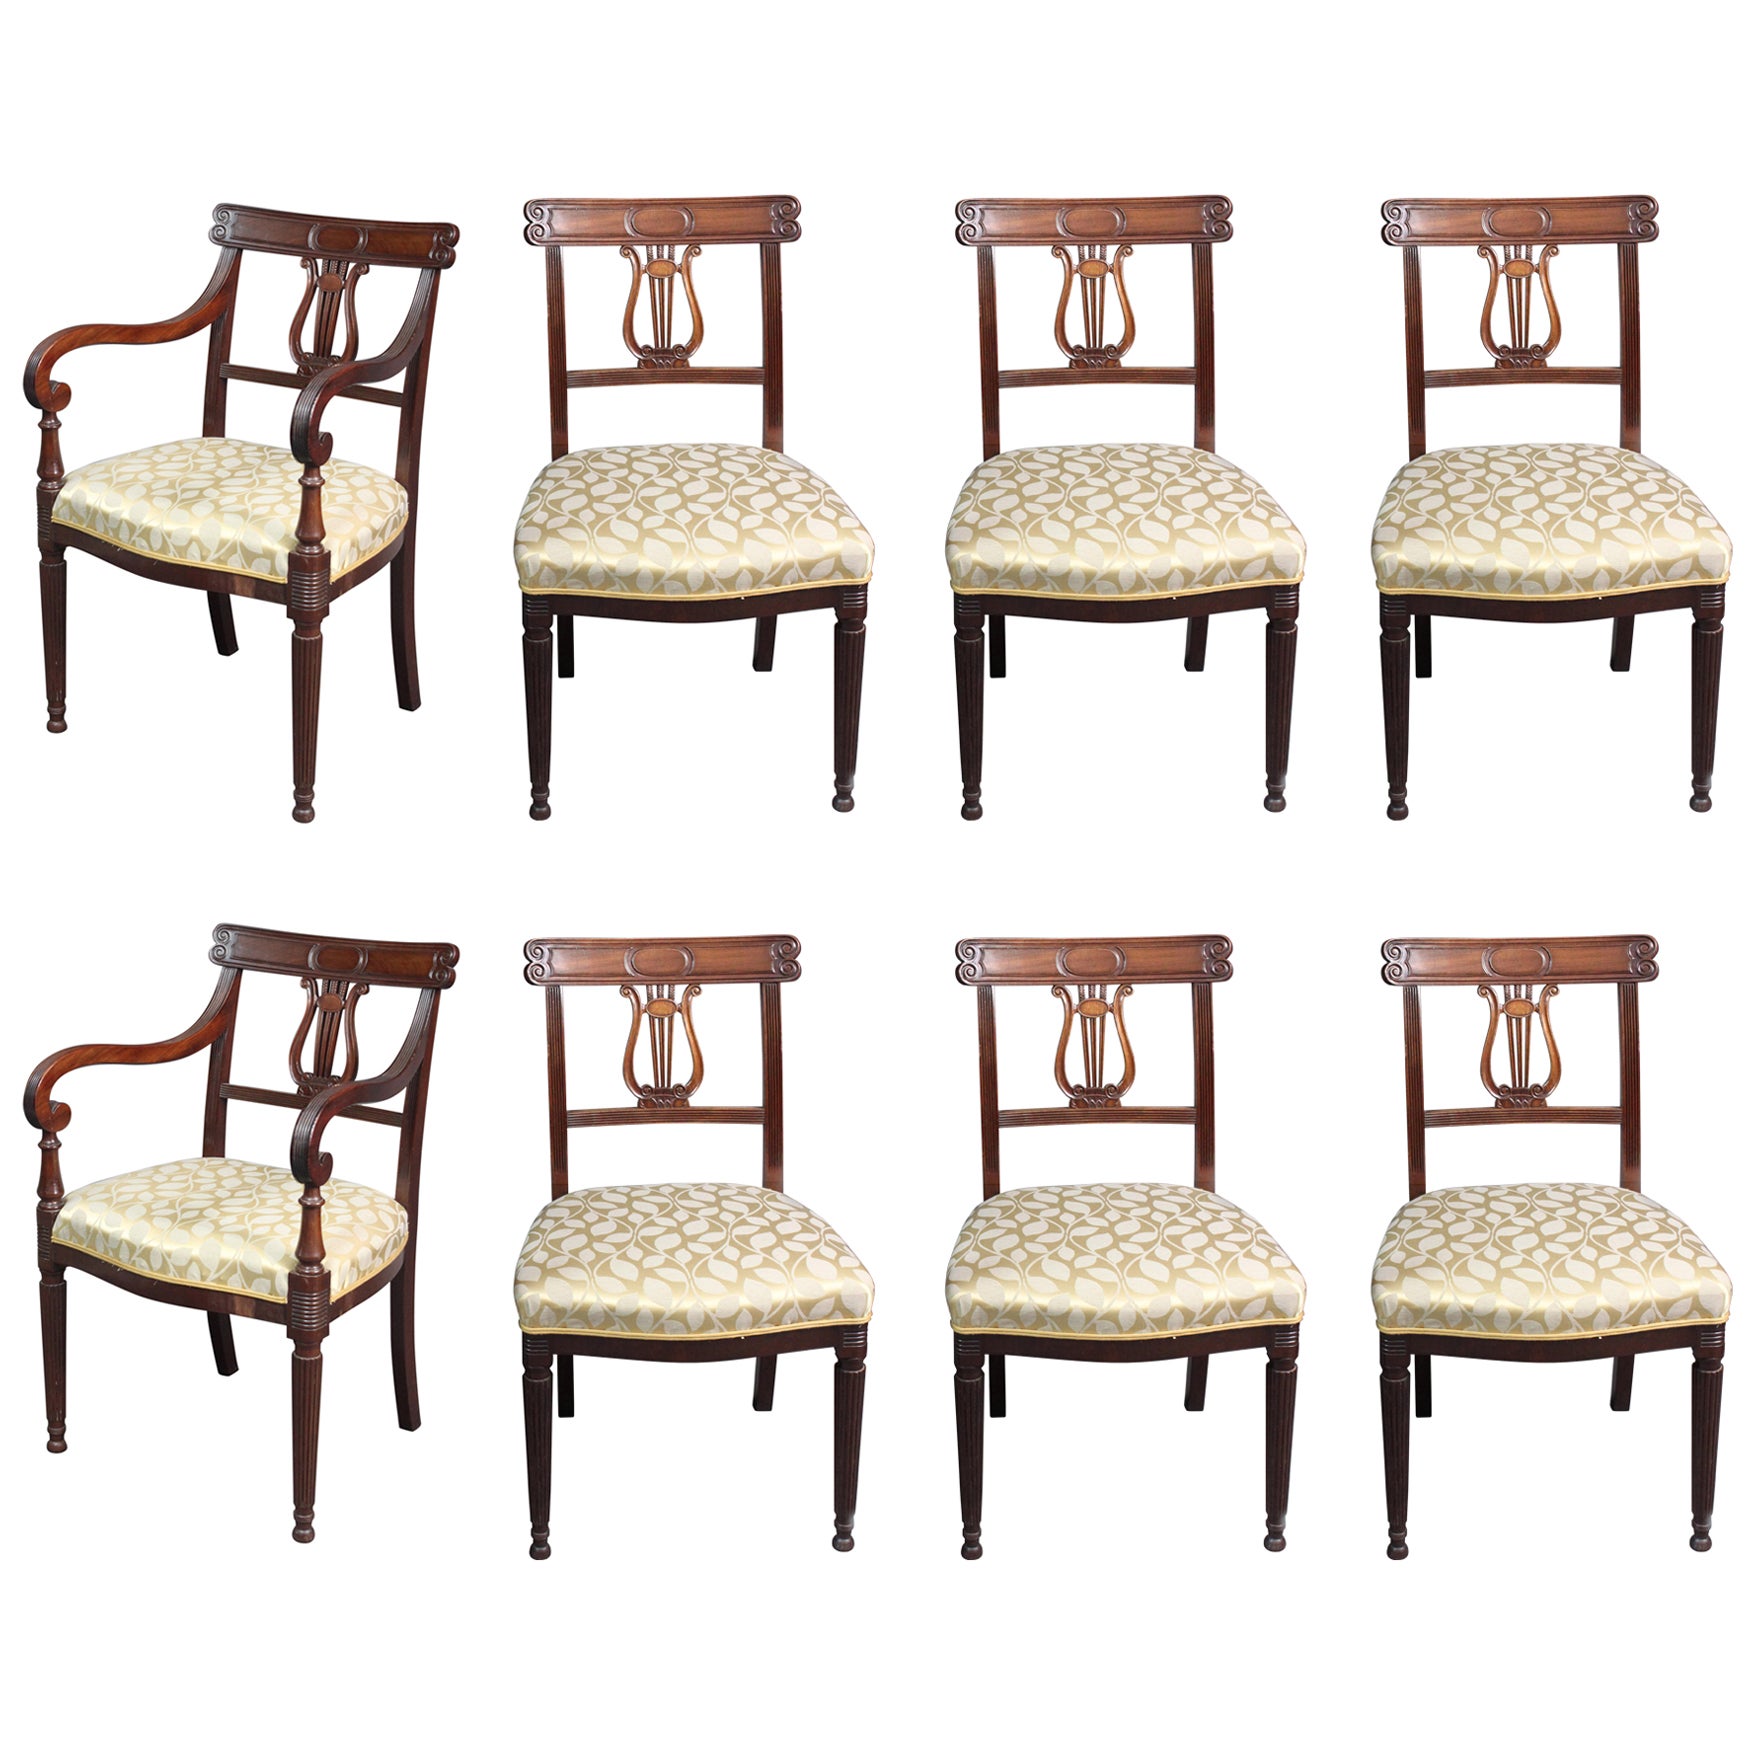 Antique Set of 8 Dining Chairs